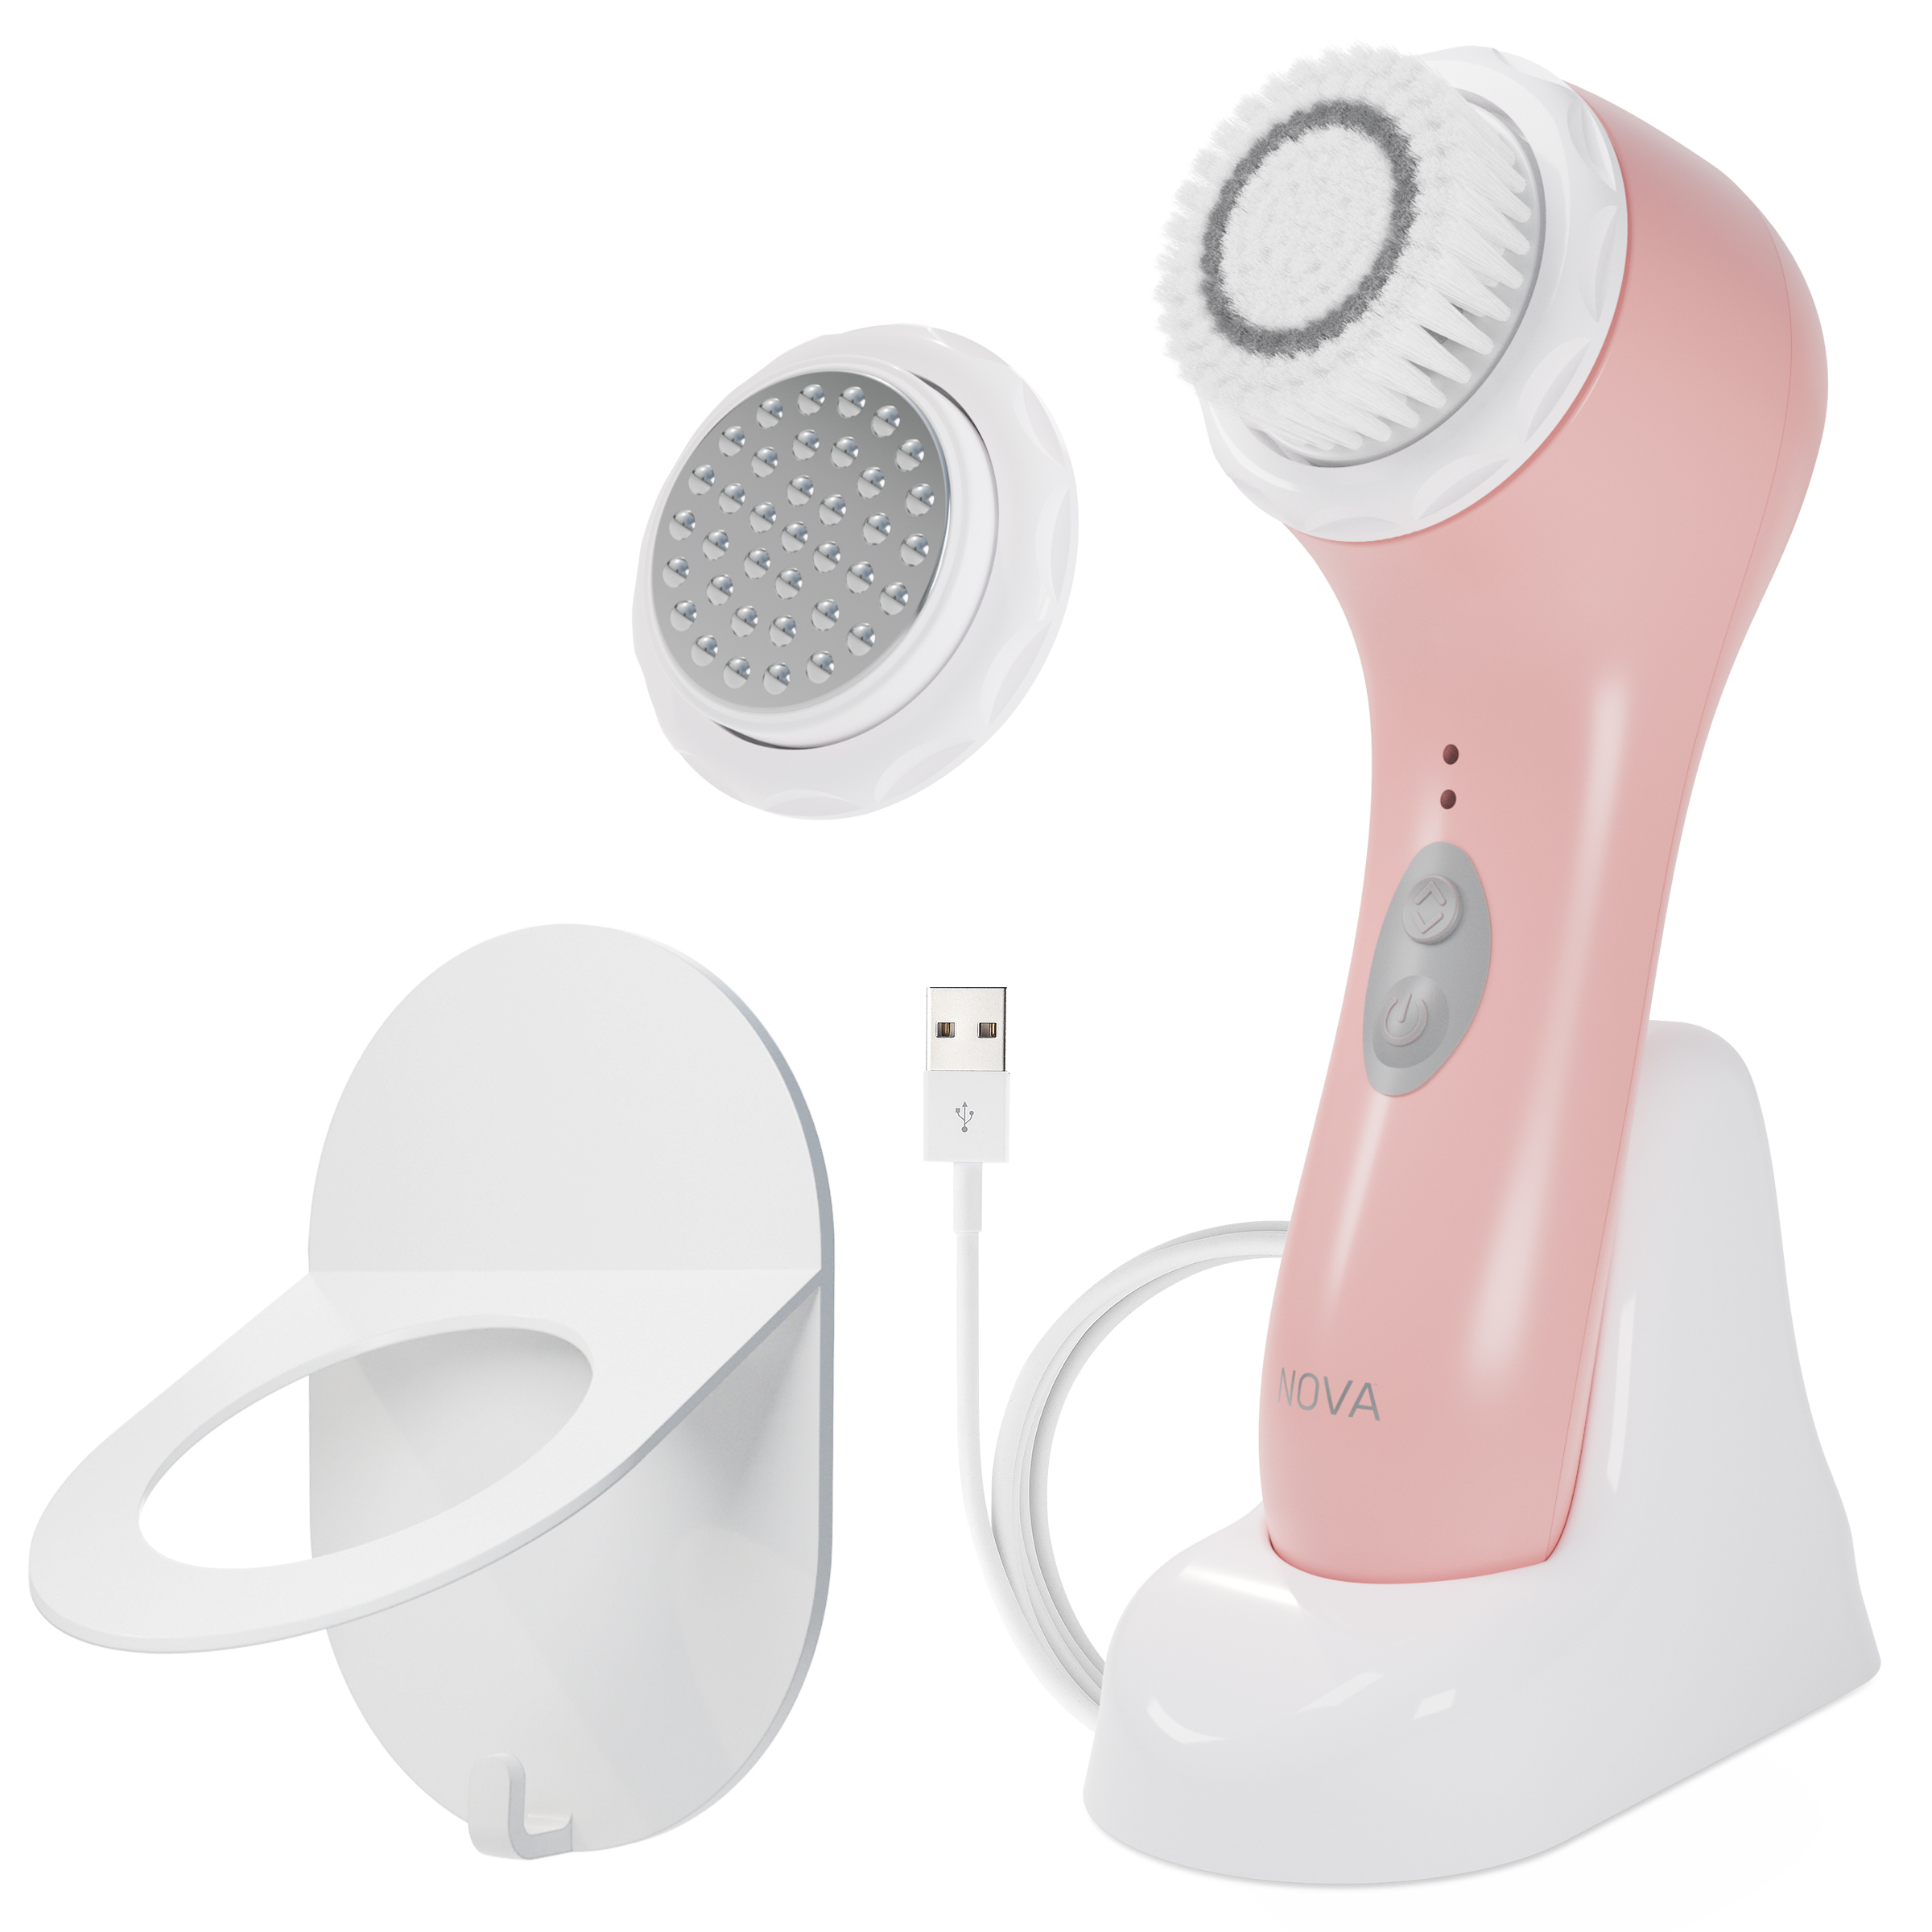 Spa Sciences NOVA - Sonic Facial Cleansing and Exfoliating Device with Antimicrobial Brush Bristles & Serum Infuser, Pink - image 1 of 13